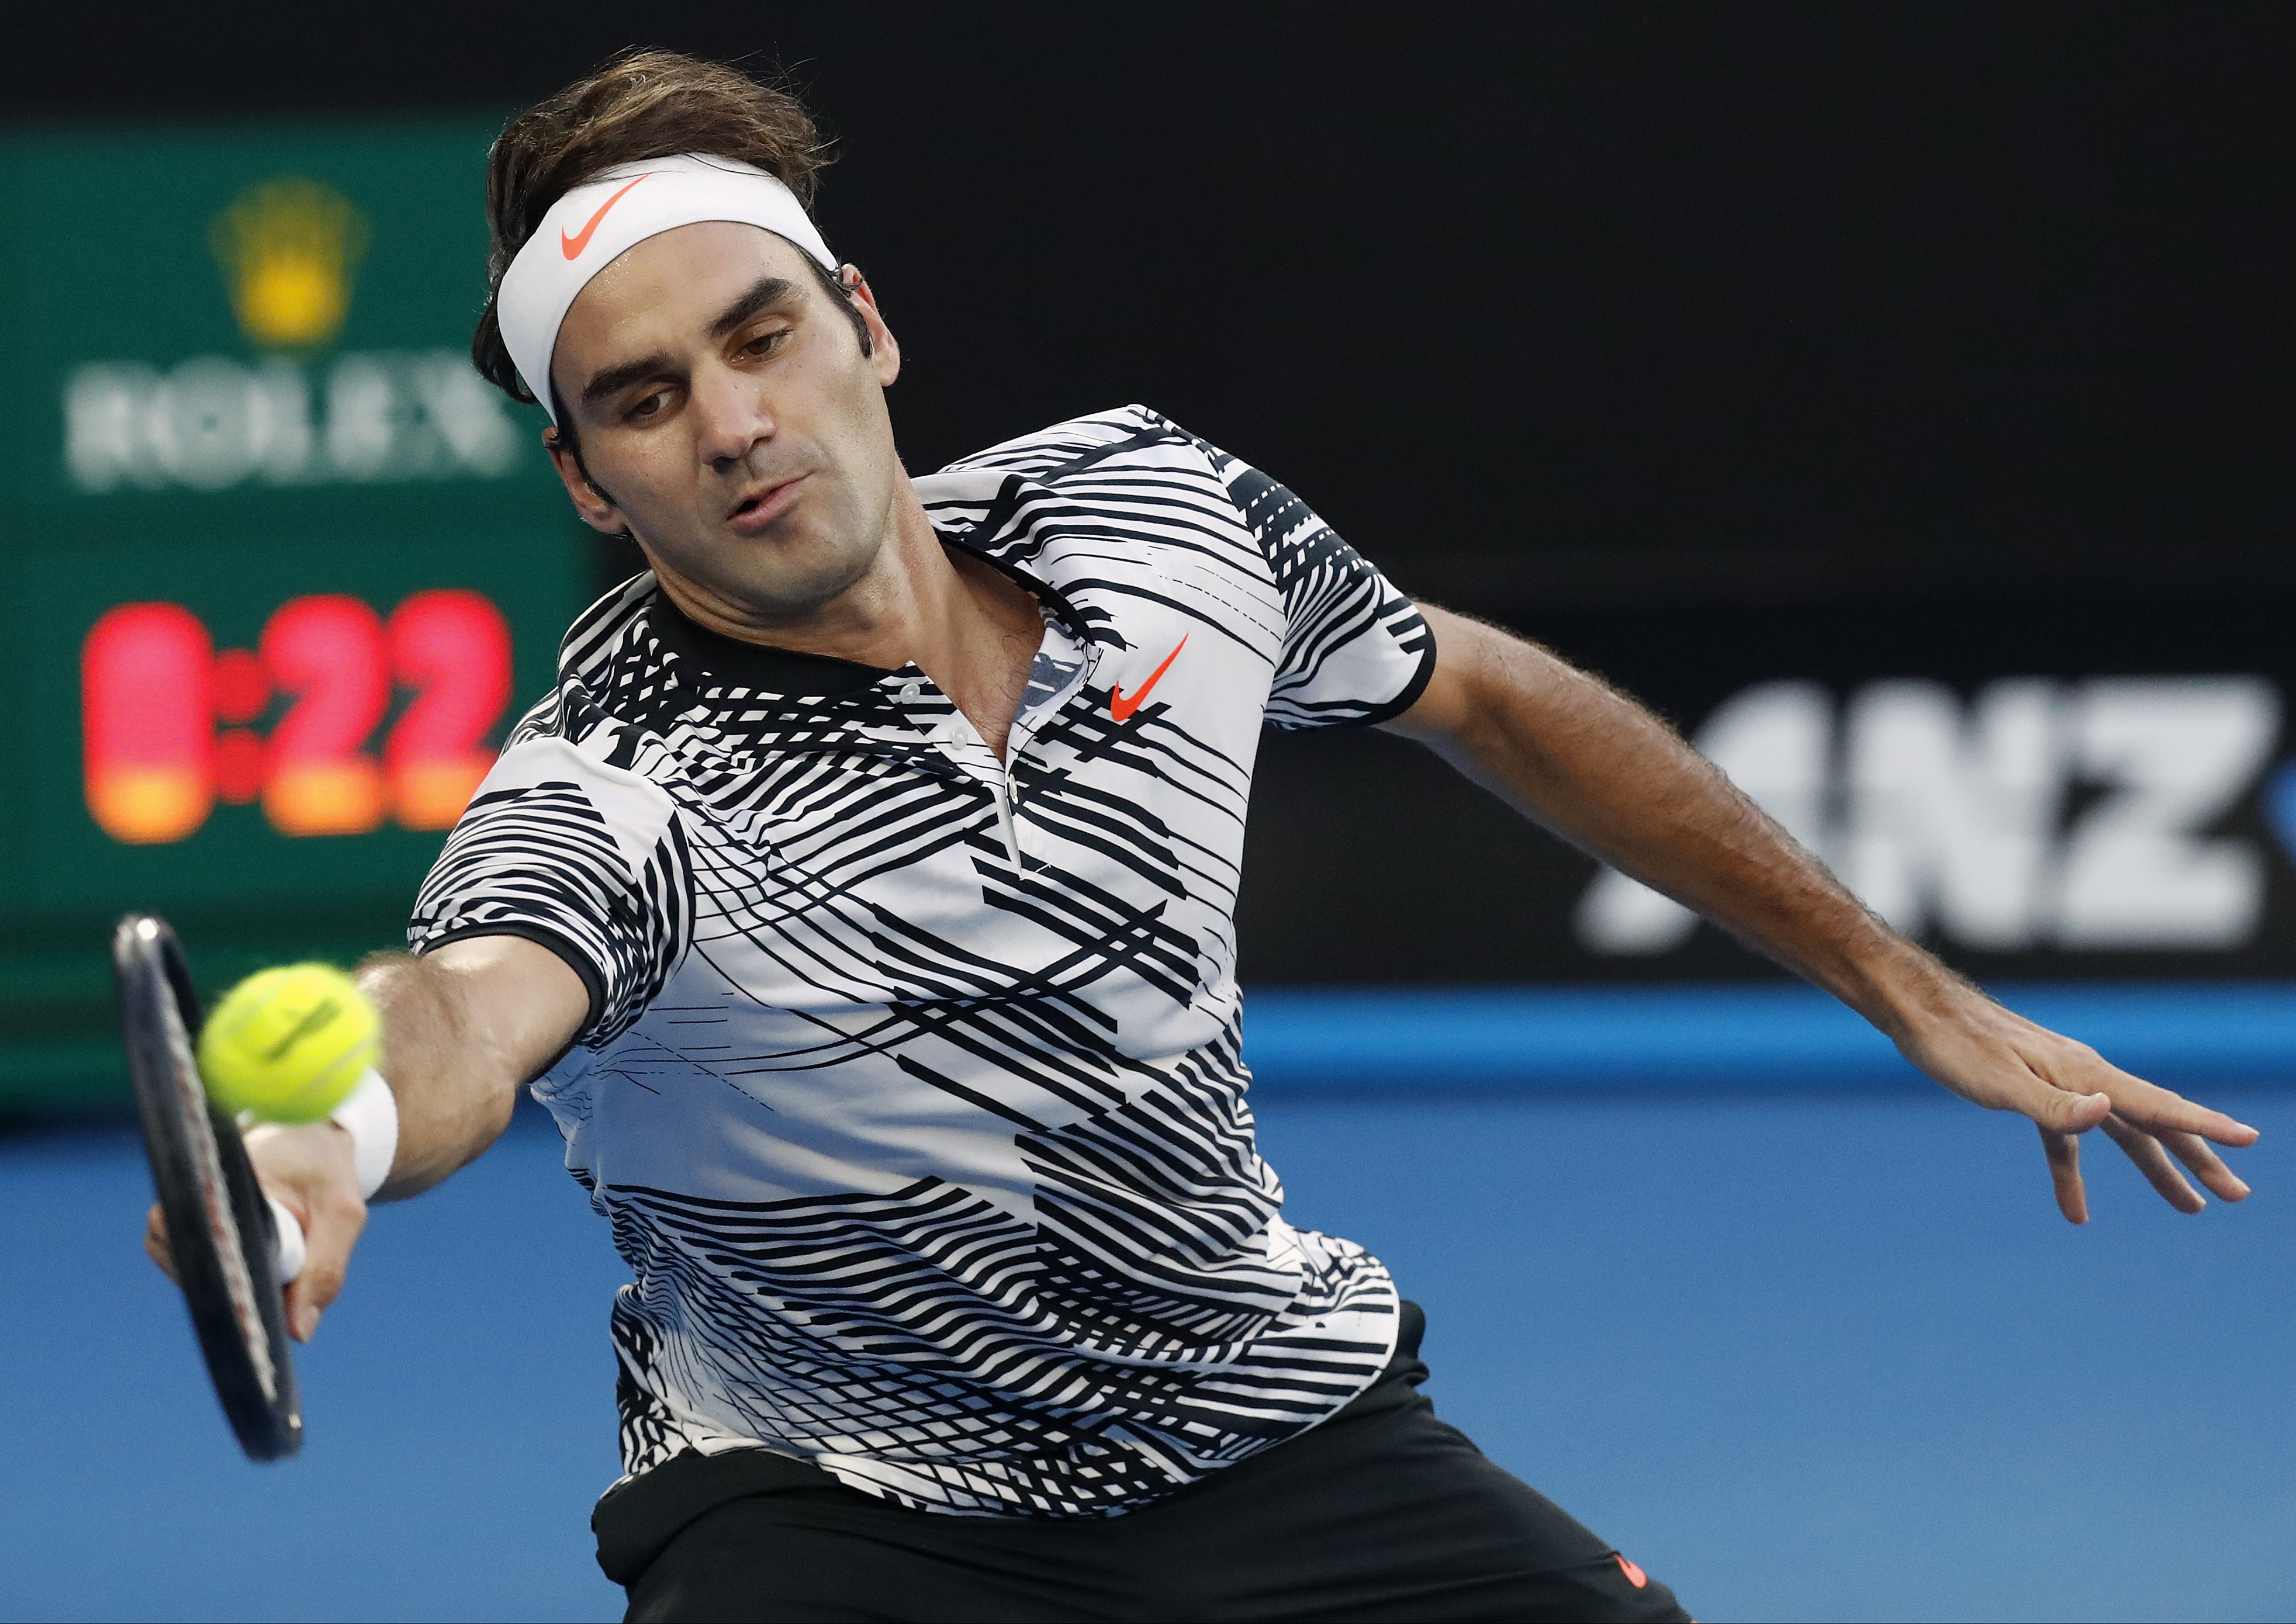 Switzerland's Roger Federer reaches to play a forehand to Spain's Rafael Nadal during the men's singles final at the Australian Open tennis championships in Melbourne, Australia, Sunday, Jan. 29, 2017. (AP Photo/Kin Cheung)